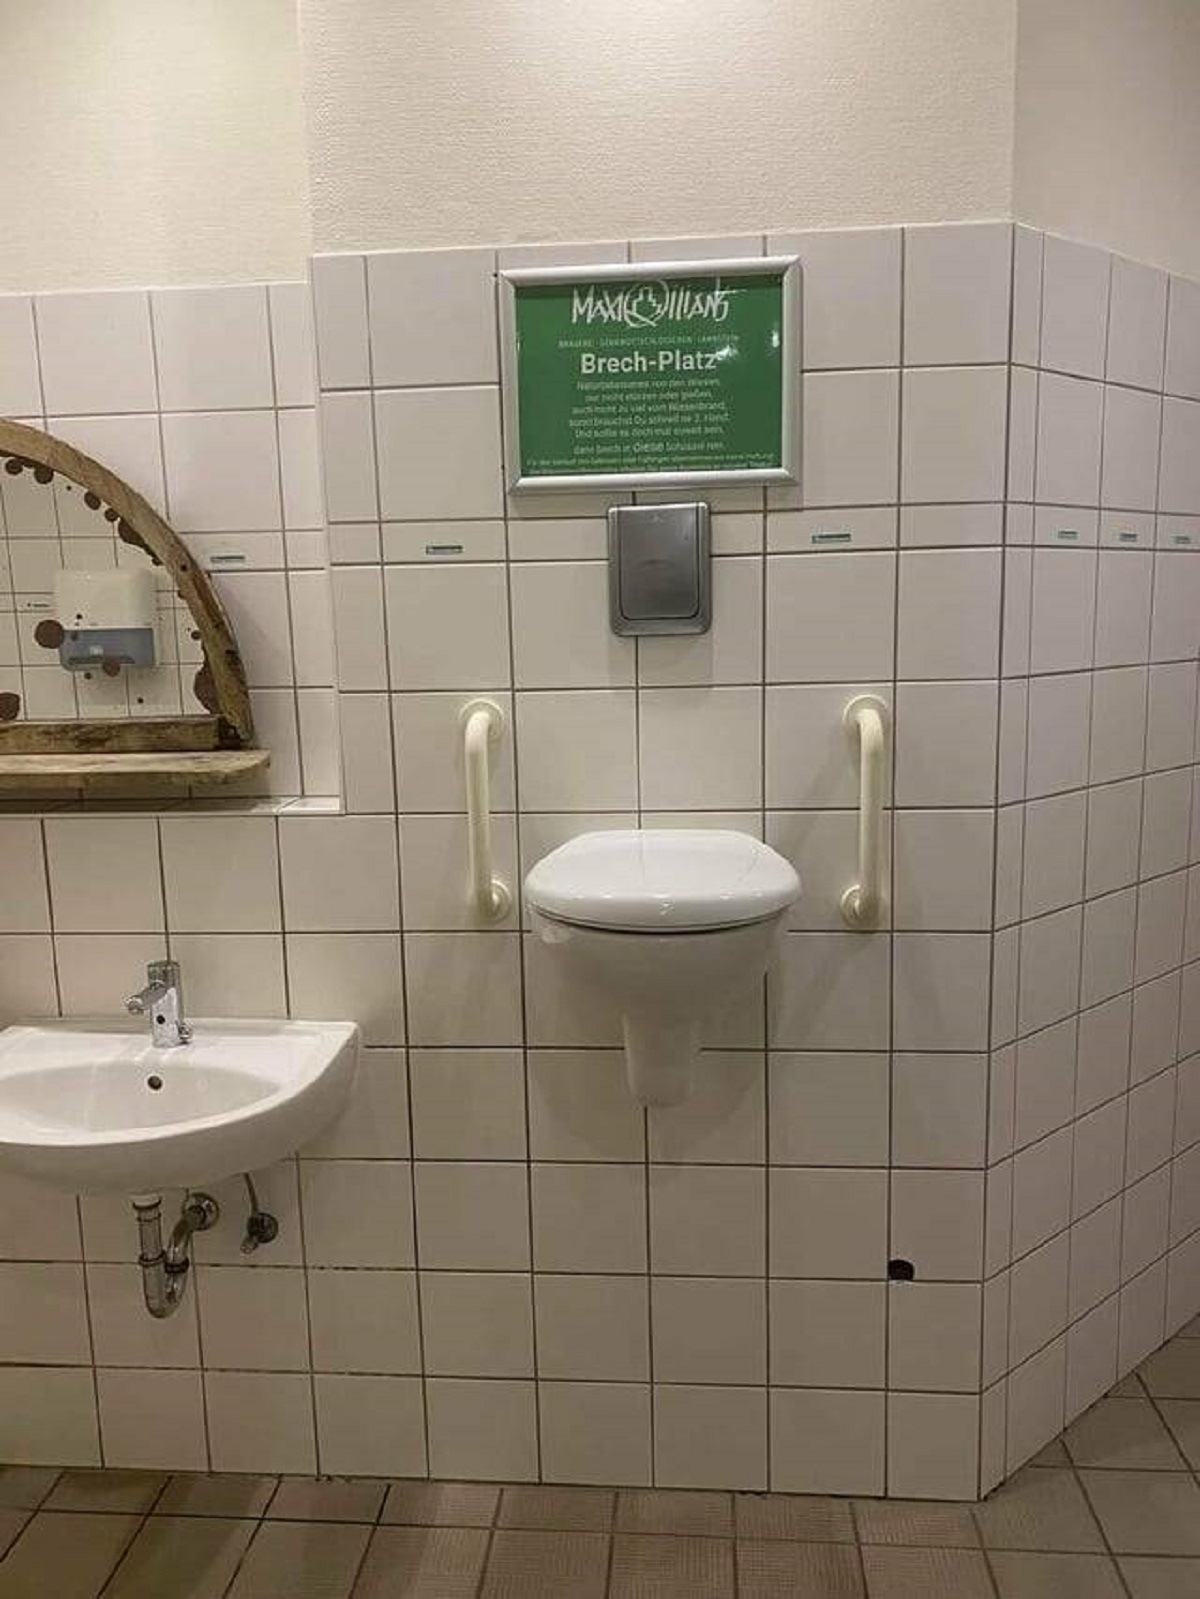 "Spotted in a bar in Koblenz, Germany. A wall-mounted "toilet" specifically for vomiting in."